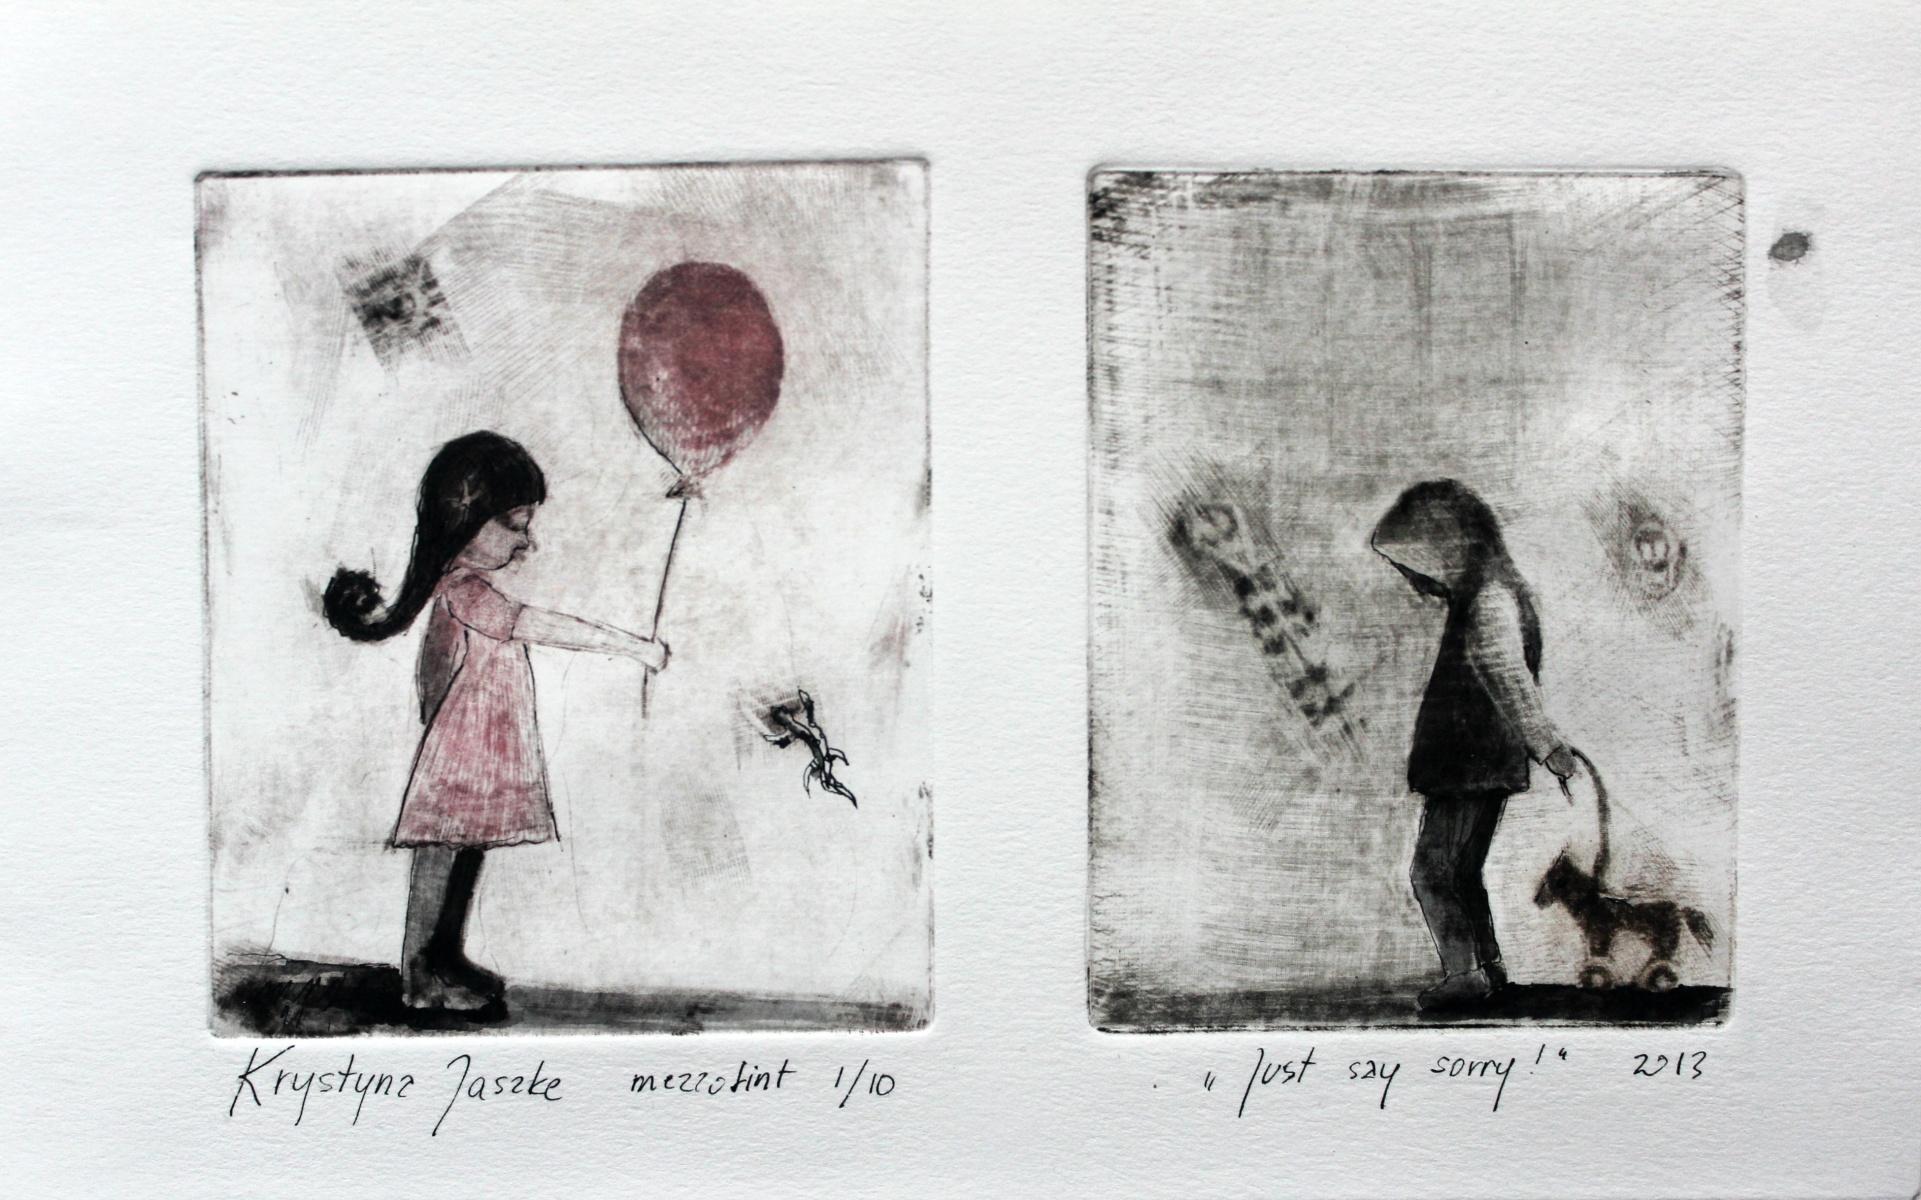 Just say sorry - XXI Century, Contemporary Figurative Print, Black, White, Pink